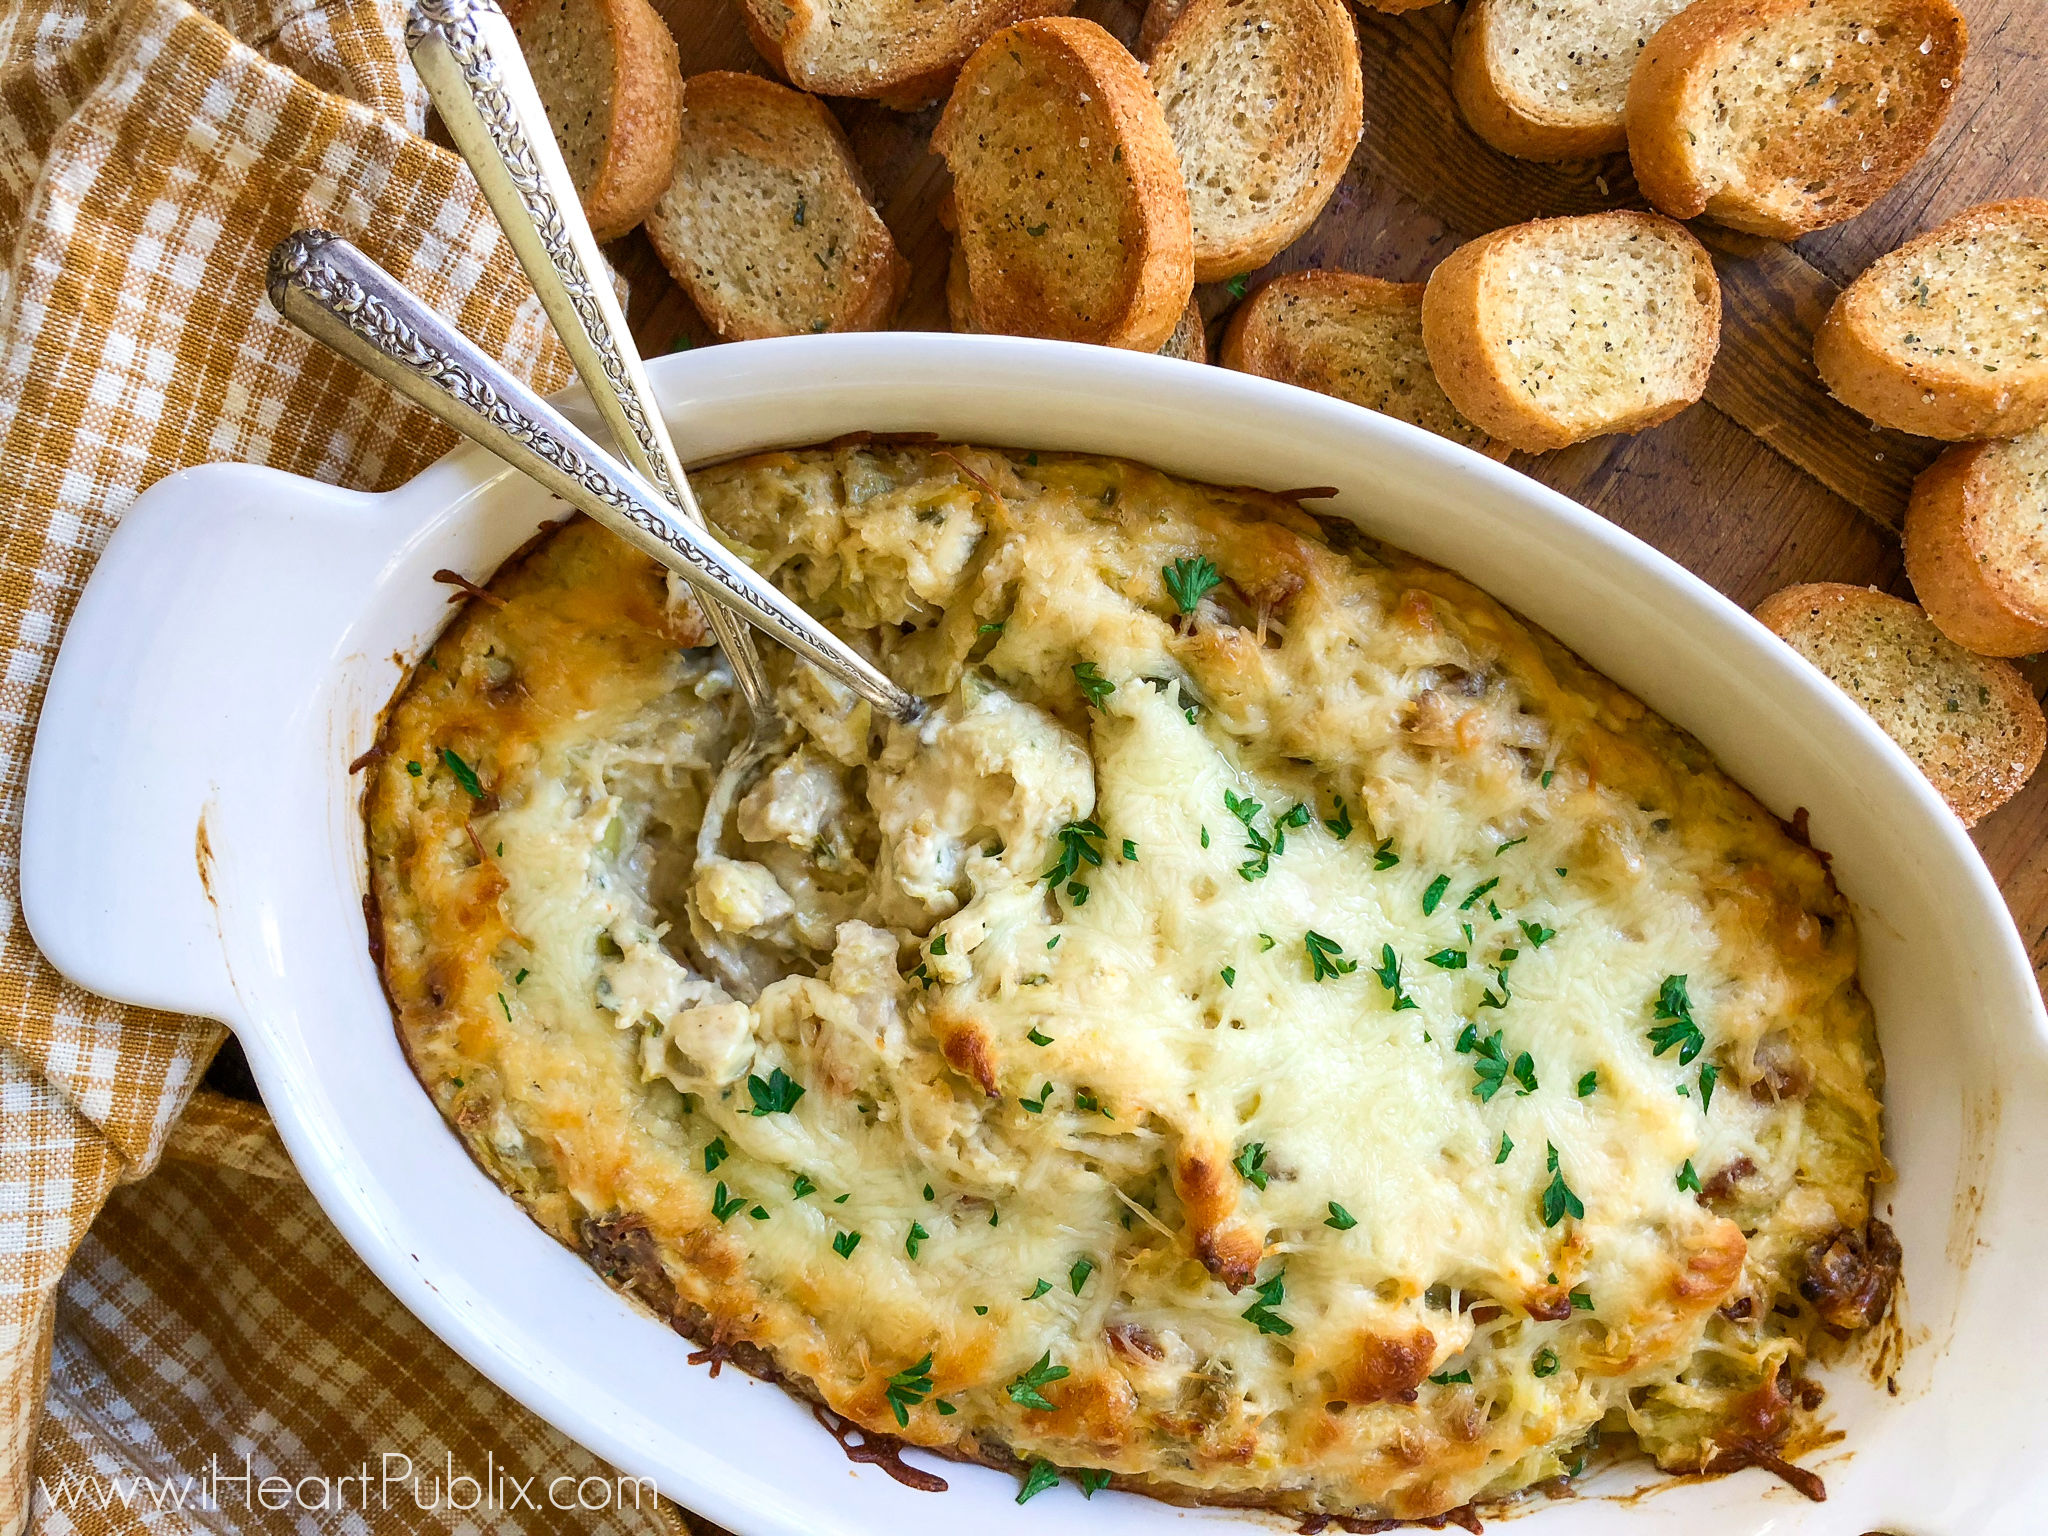 Baked Artichoke & Turkey Dip - Grab A Great Discount On Hellmann's Mayo To Have For All Your Favorite Meals on I Heart Publix